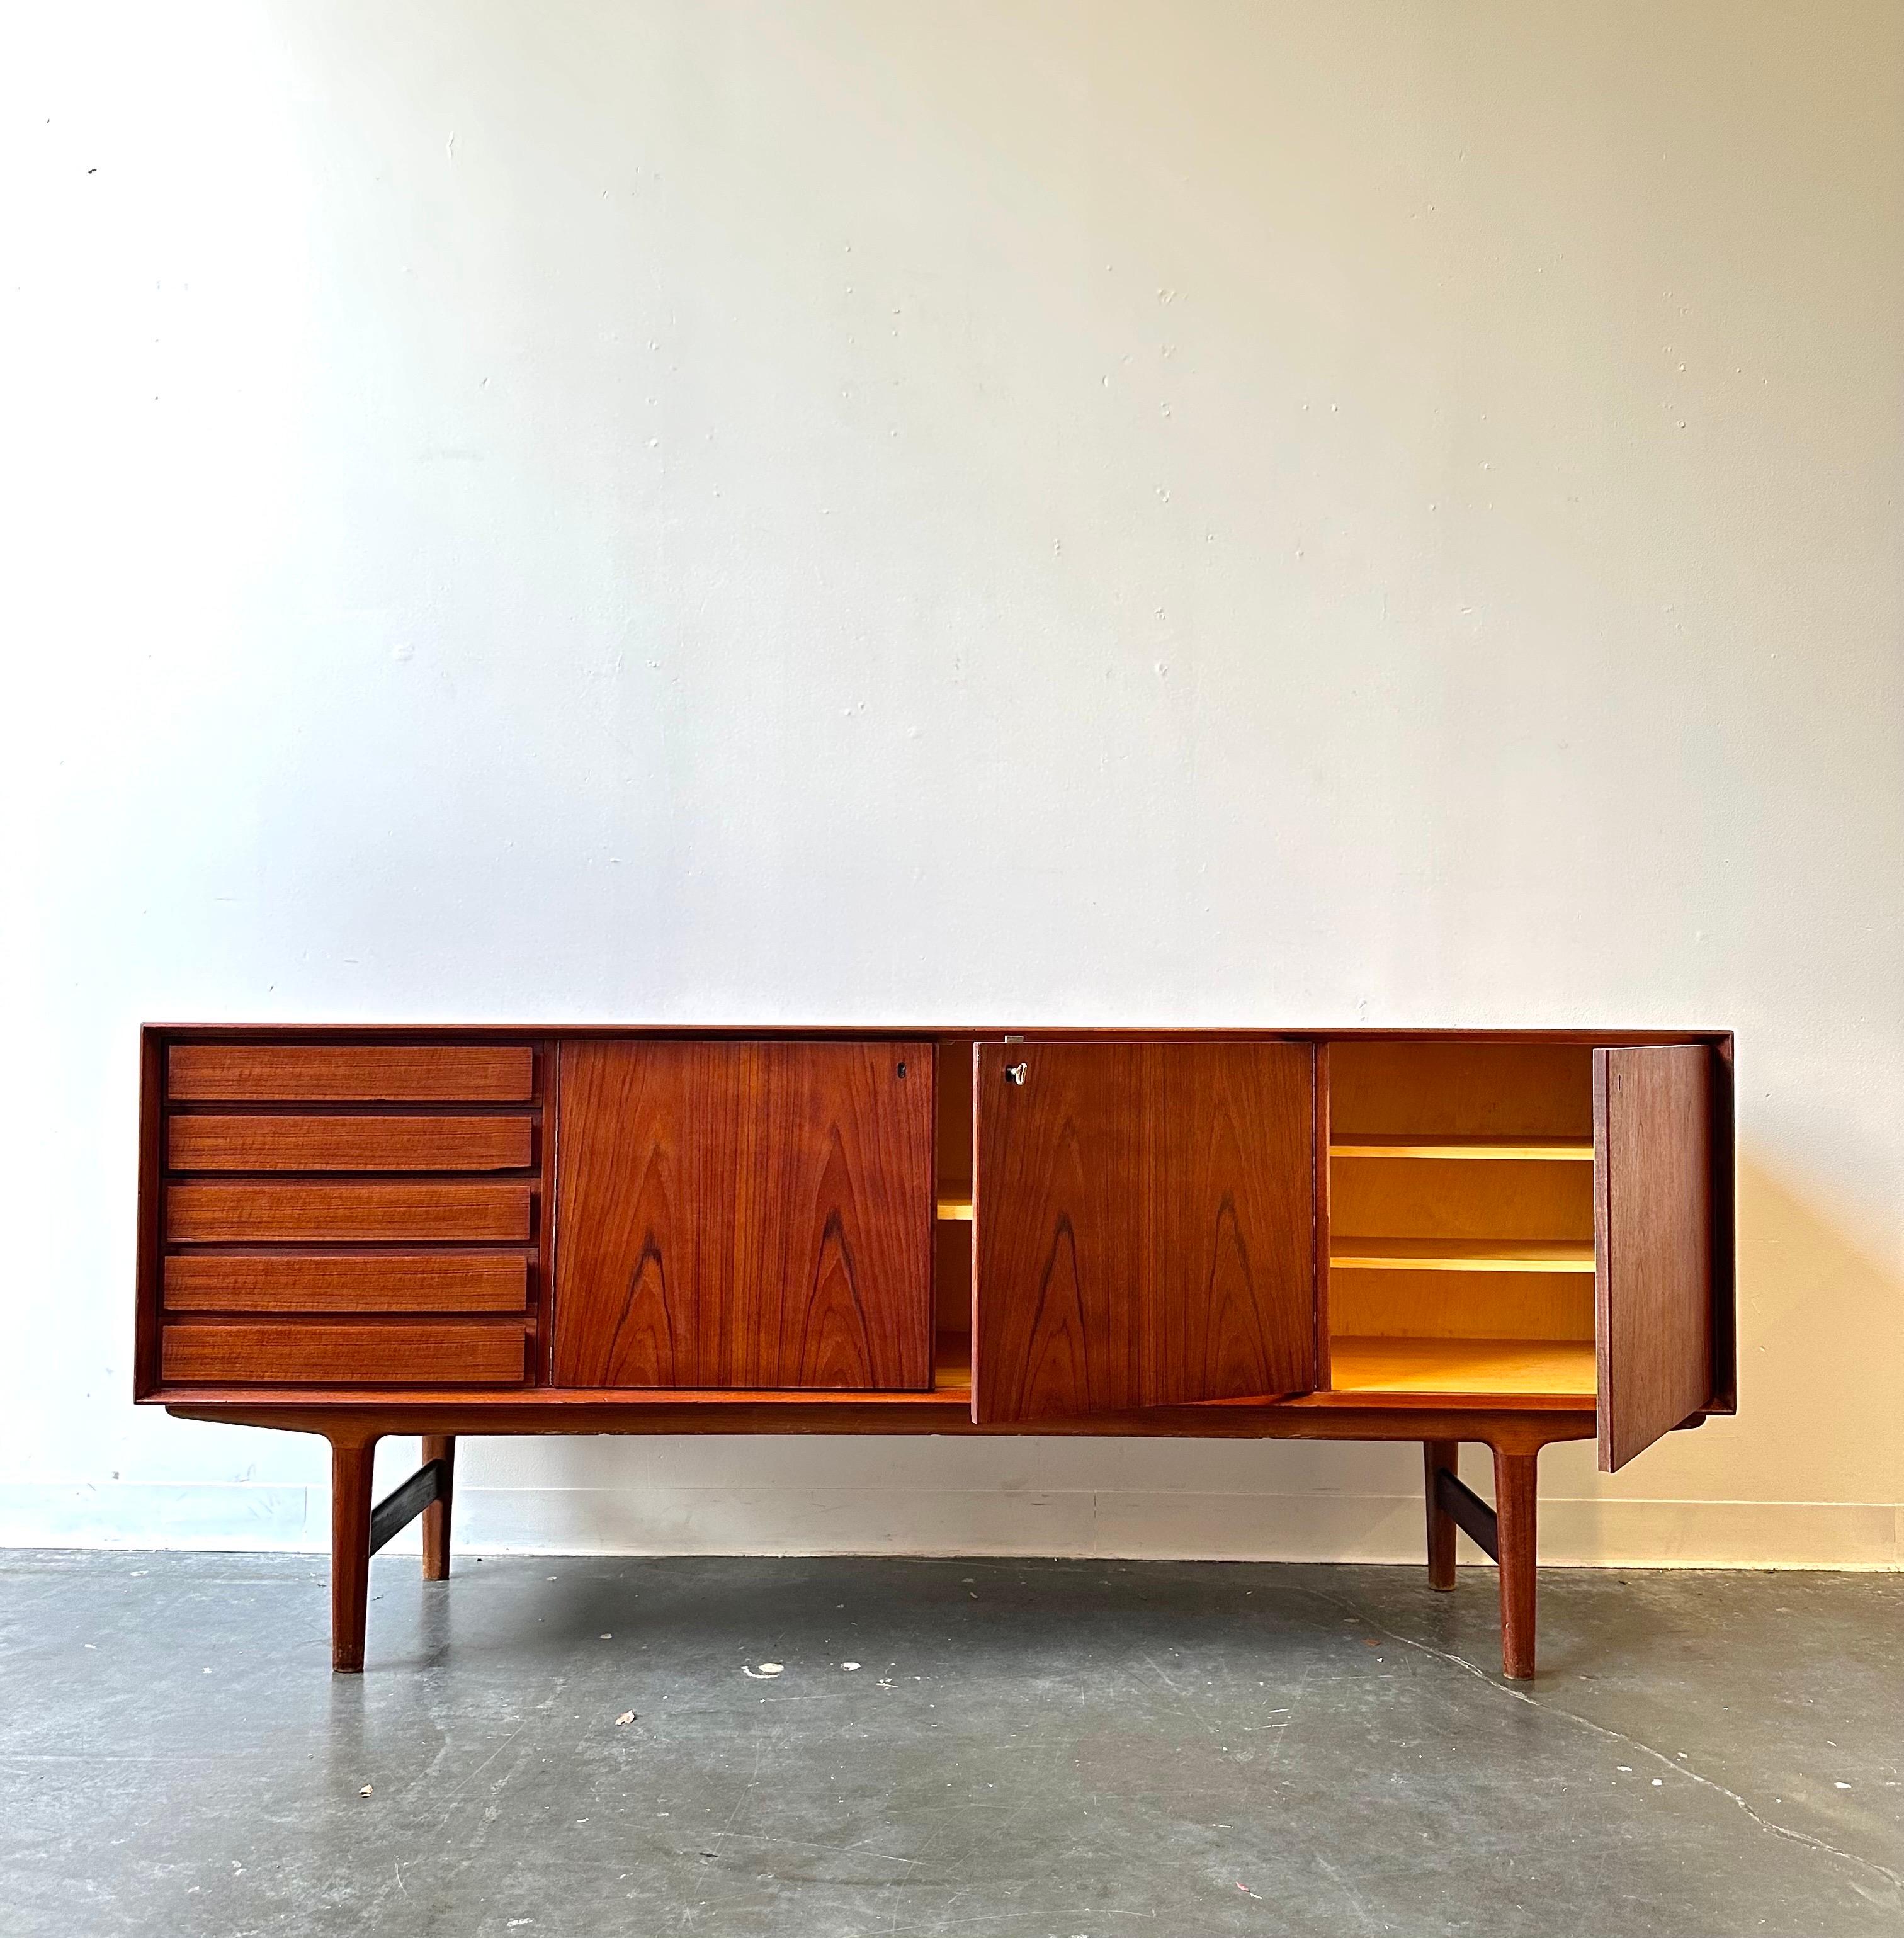 Fredrik Kayser Danish Teak Credenza Sideboard

This piece has 5 felt lined drawers, three doors with original key  that open up to a Maple Interior and adjustable a shelf. 

 Made in Norway   78.5, wide, 17.25, deep 32.5 high.  